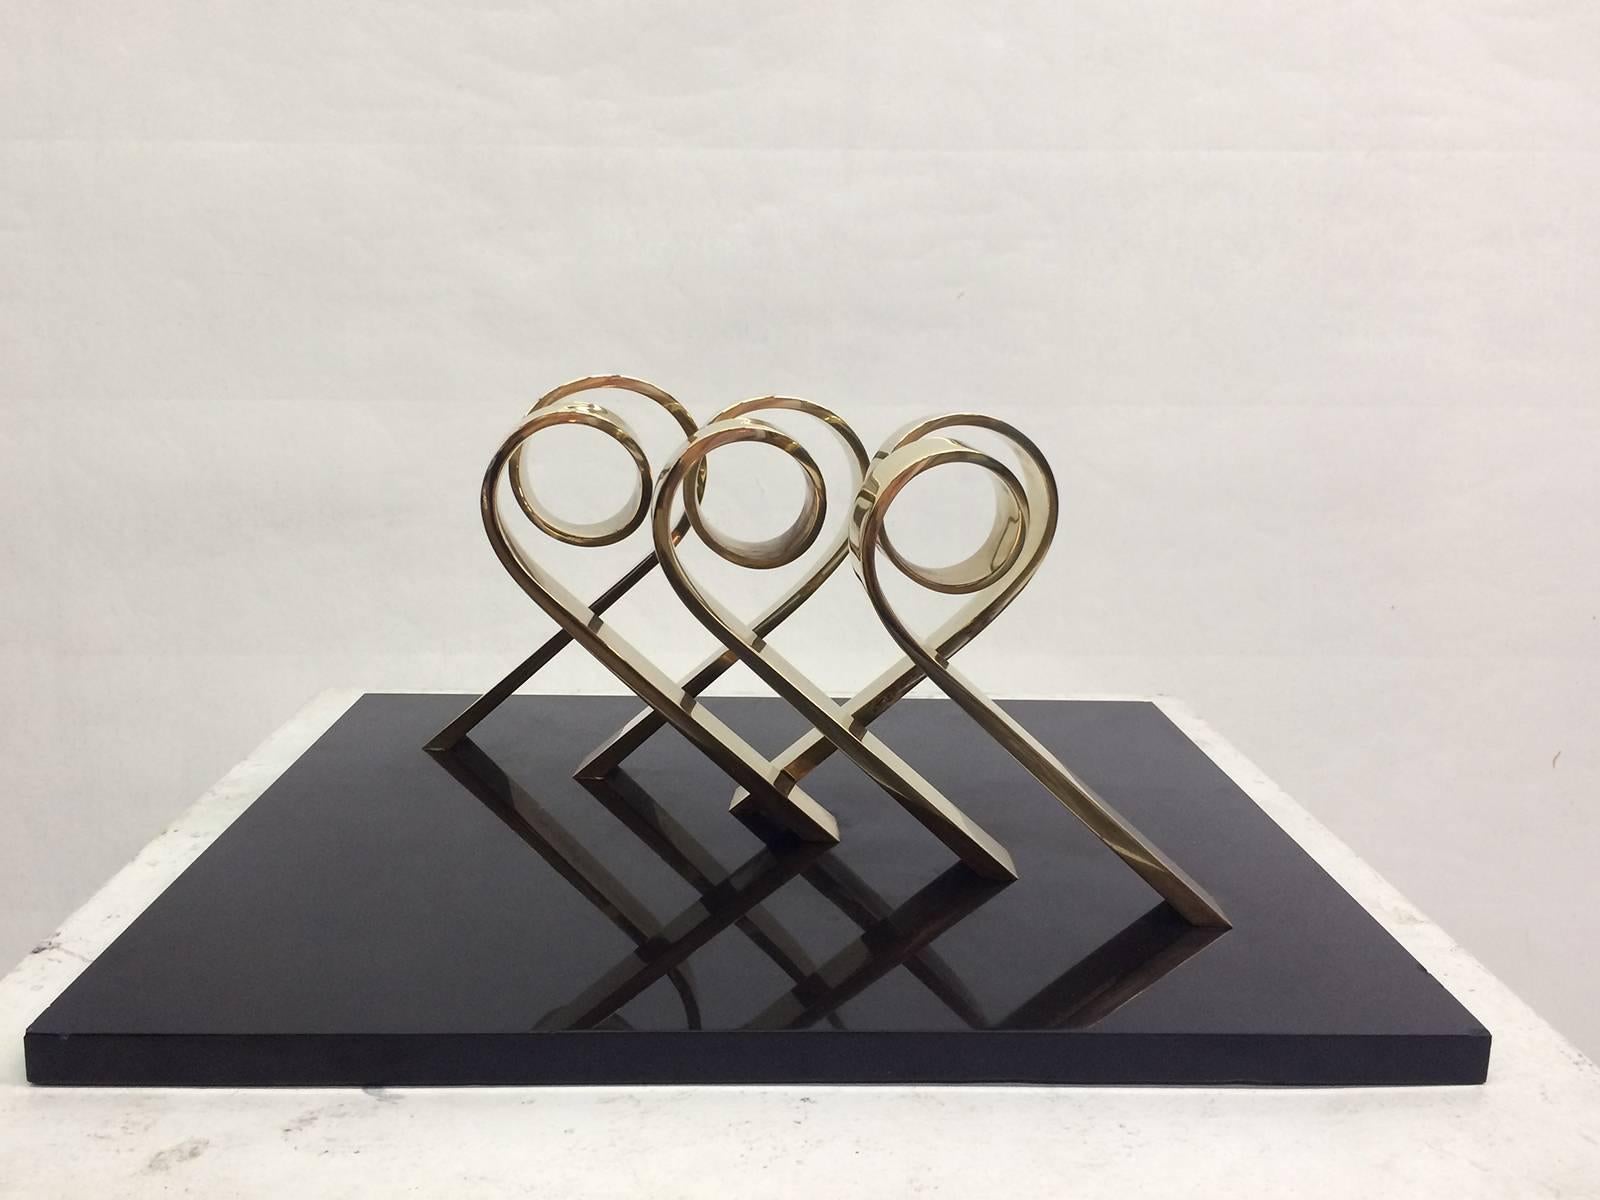 This bronze sculpture by important artist: Peter Chinni, from 1968, is a modern abstract sculpture. The reflective surface of the twist and base produces an element of interaction for the viewer. Signature, date, and edition 2/8 inscribed. 
Peter